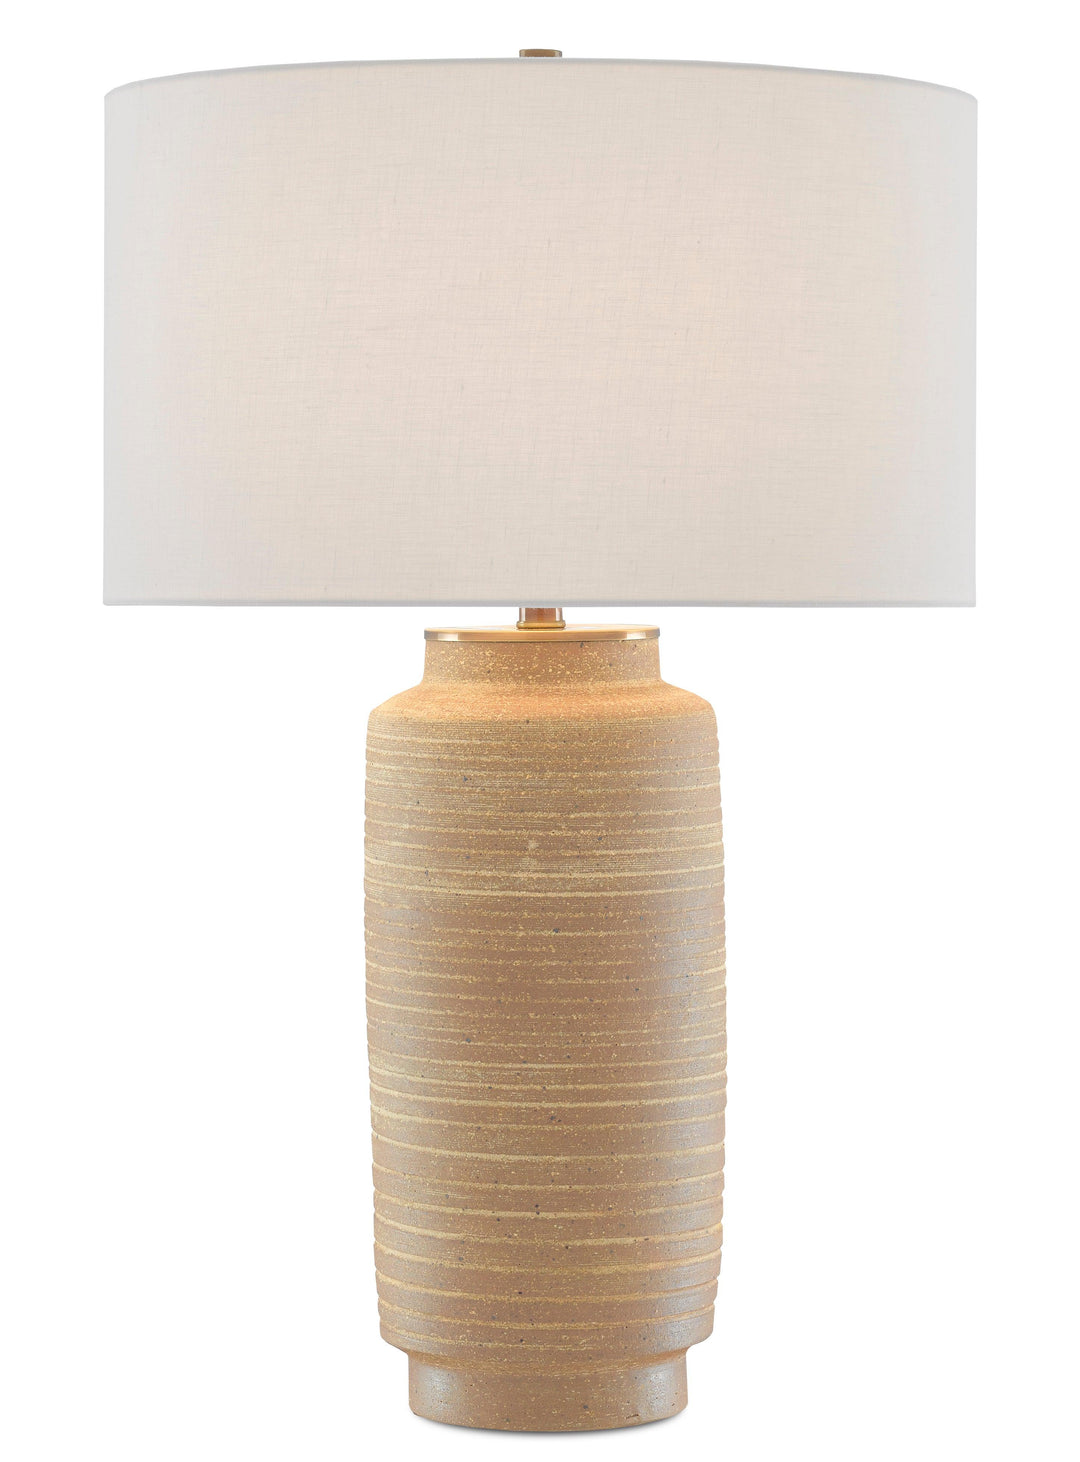 Thistle Table Lamp - Casey & Company